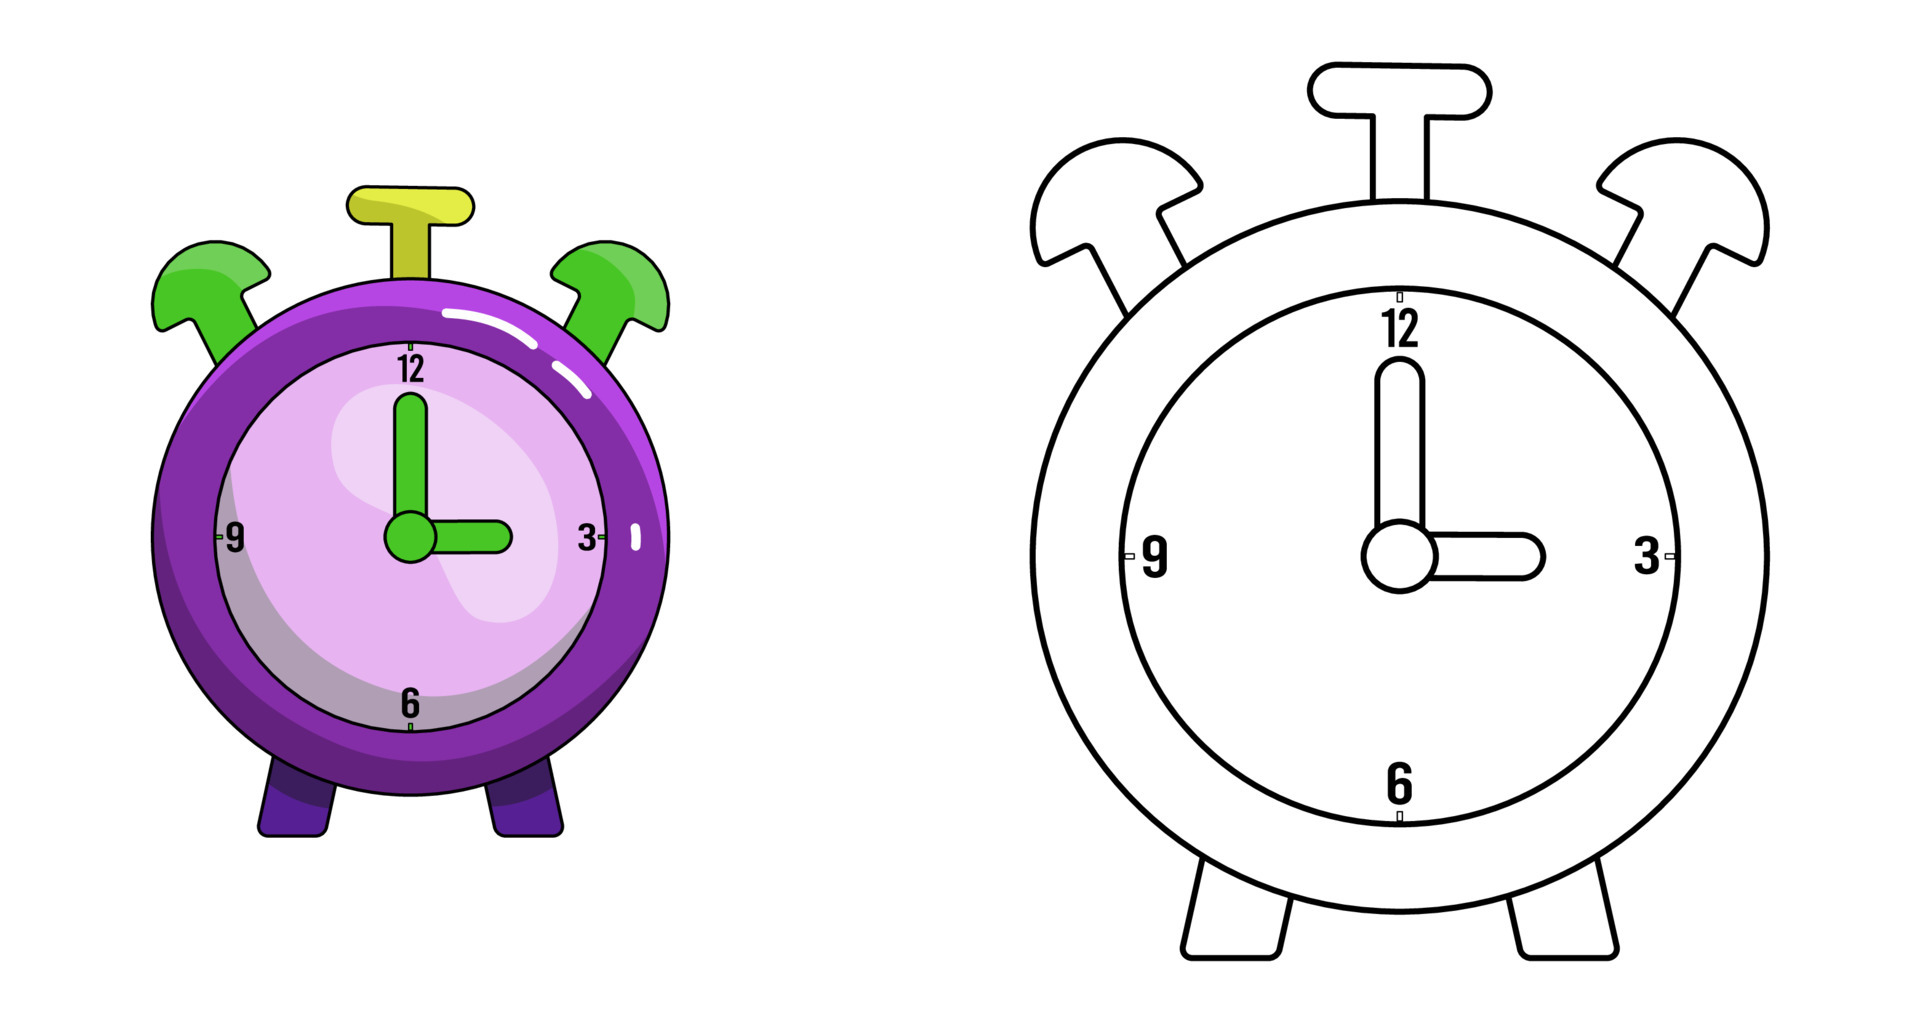 Coloring book. Cartoon clipart alarm clock for kids activity colouring  pages. Vector illustration 6999492 Vector Art at Vecteezy